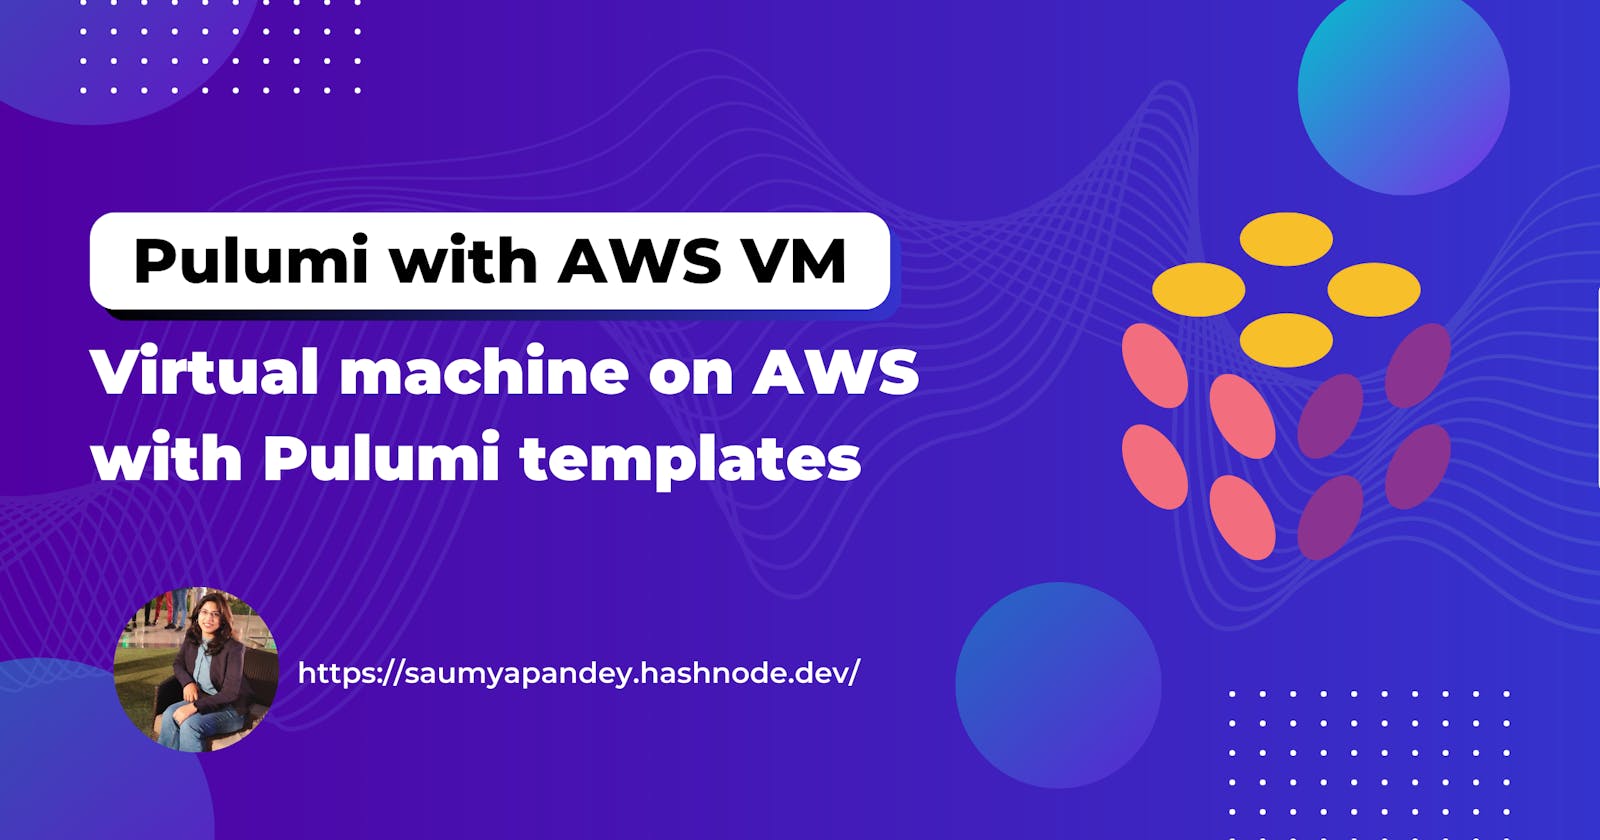 Getting Started with Pulumi for a Simple AWS Project: A Step-by-Step Guide